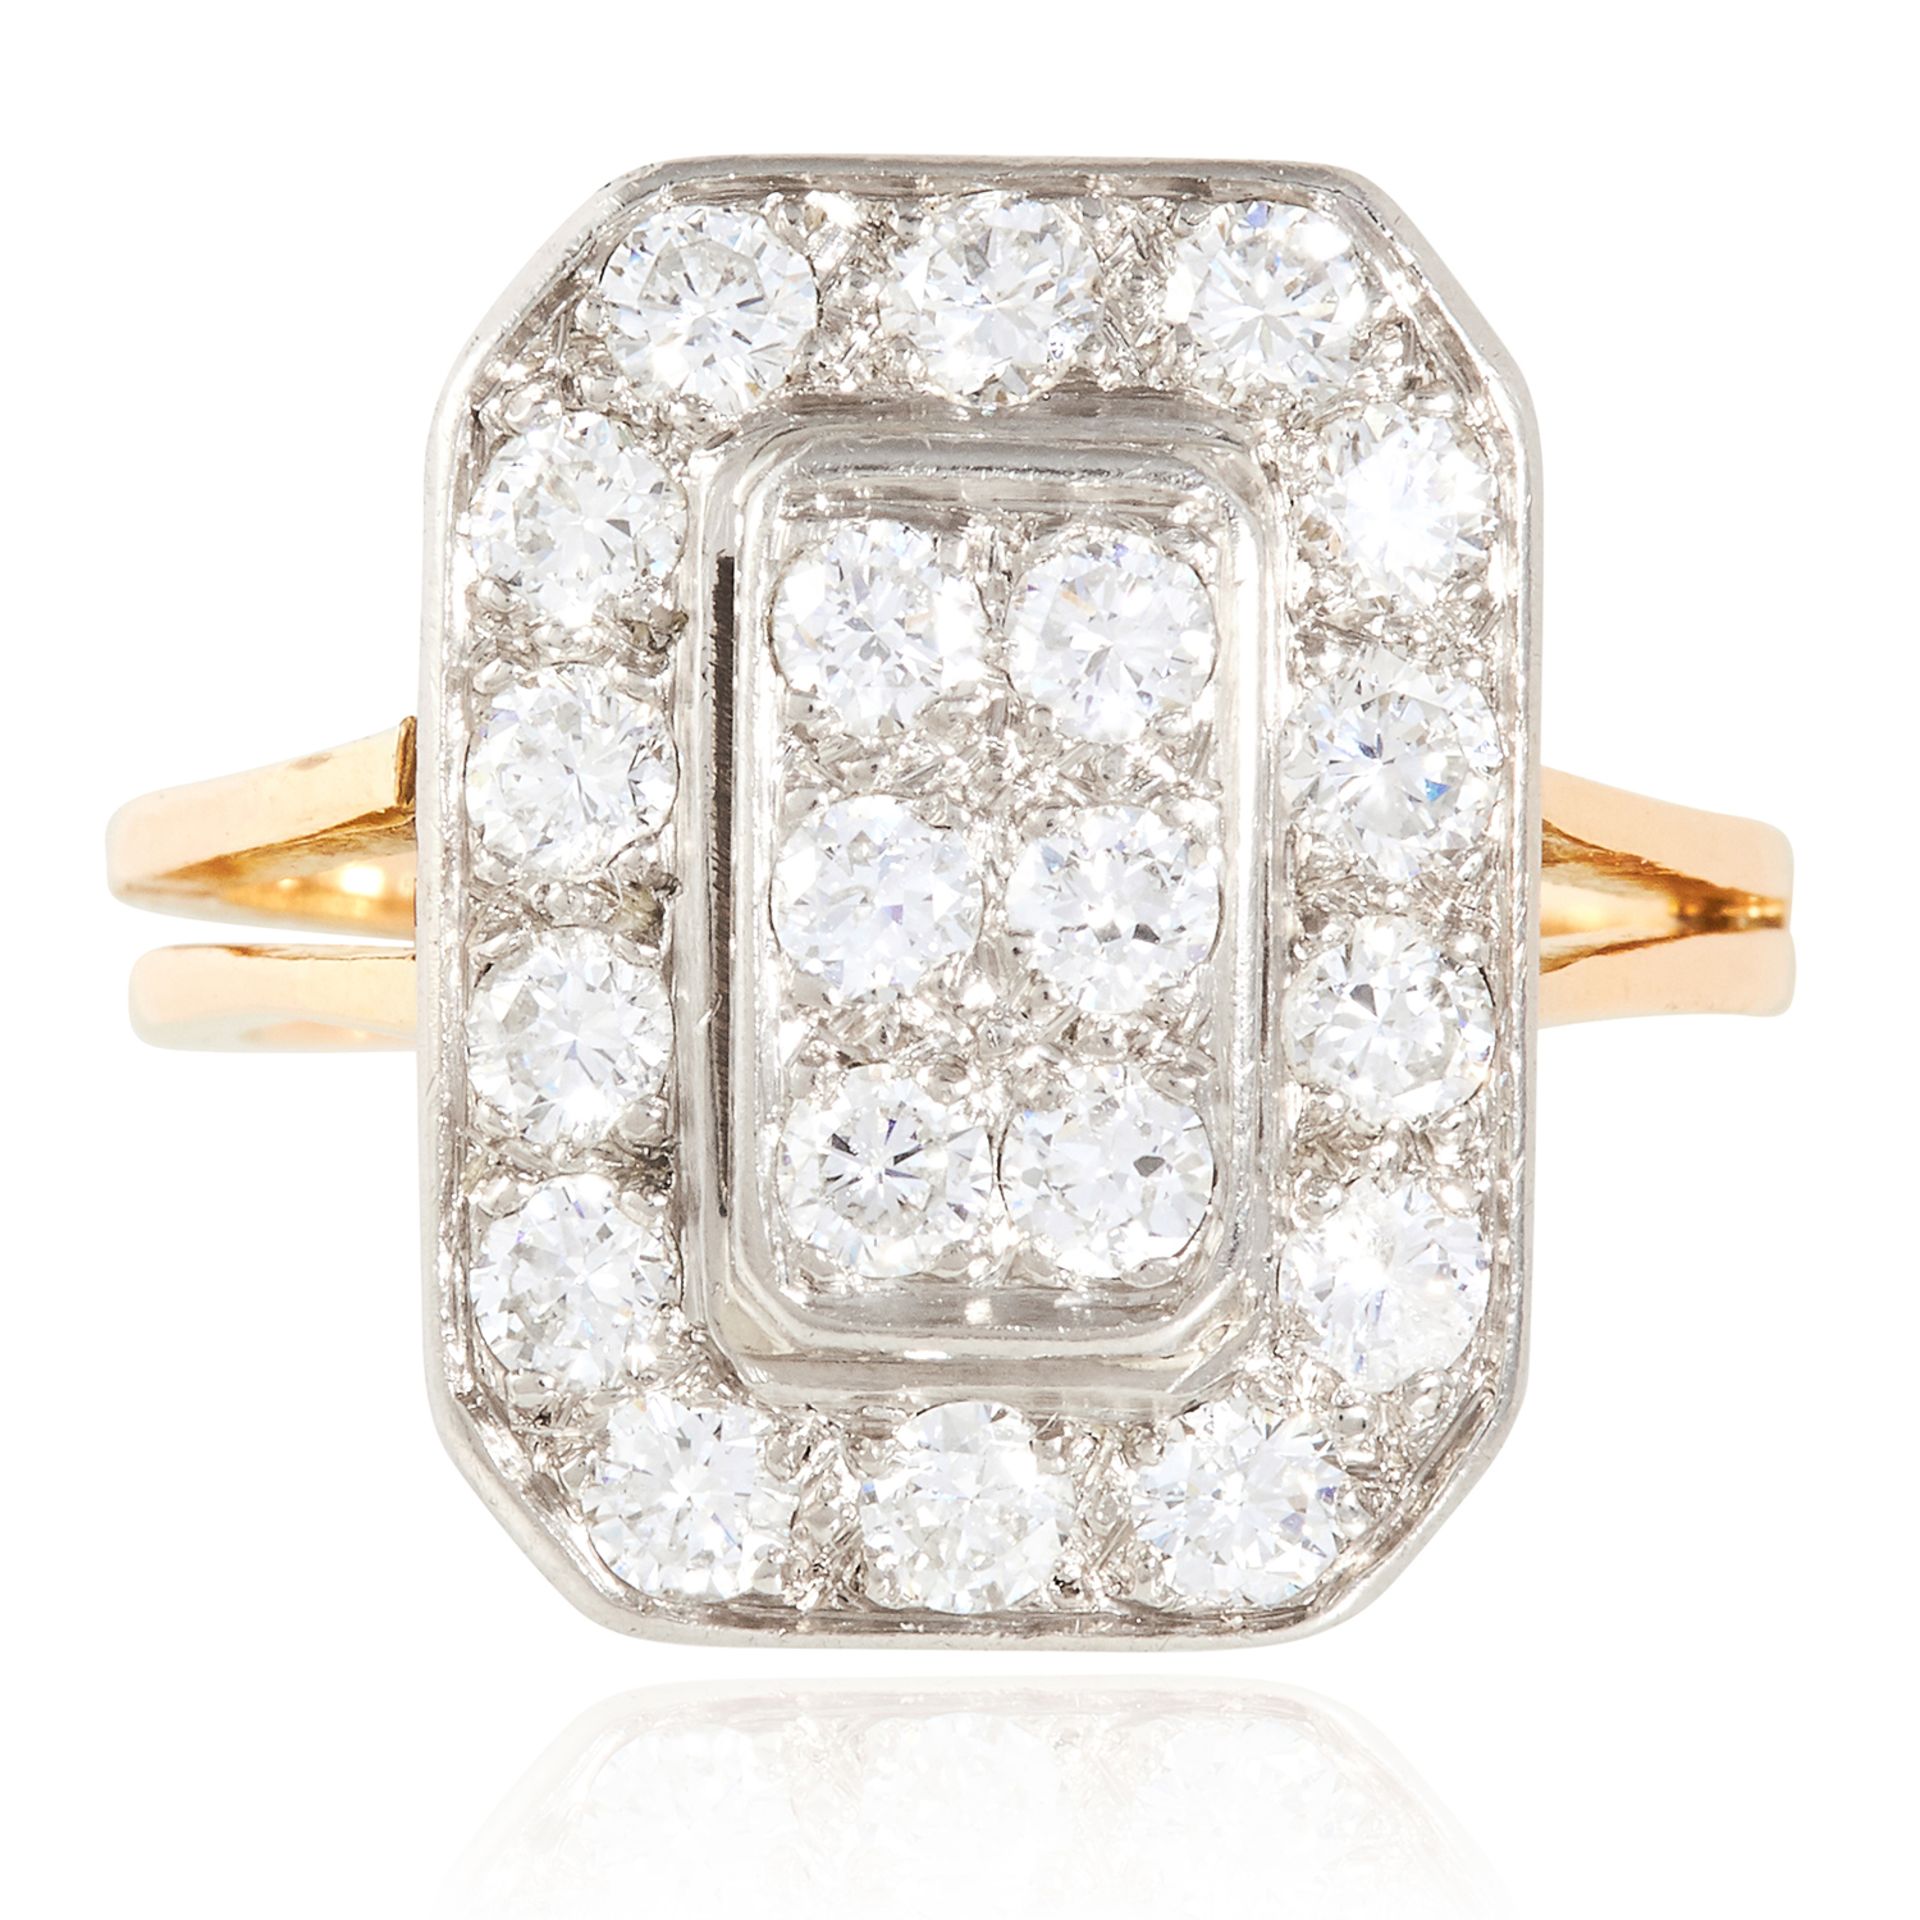 AN ANTIQUE ART DECO DIAMOND RING in 18ct yellow and platinum, the octagonal face jewelled with round